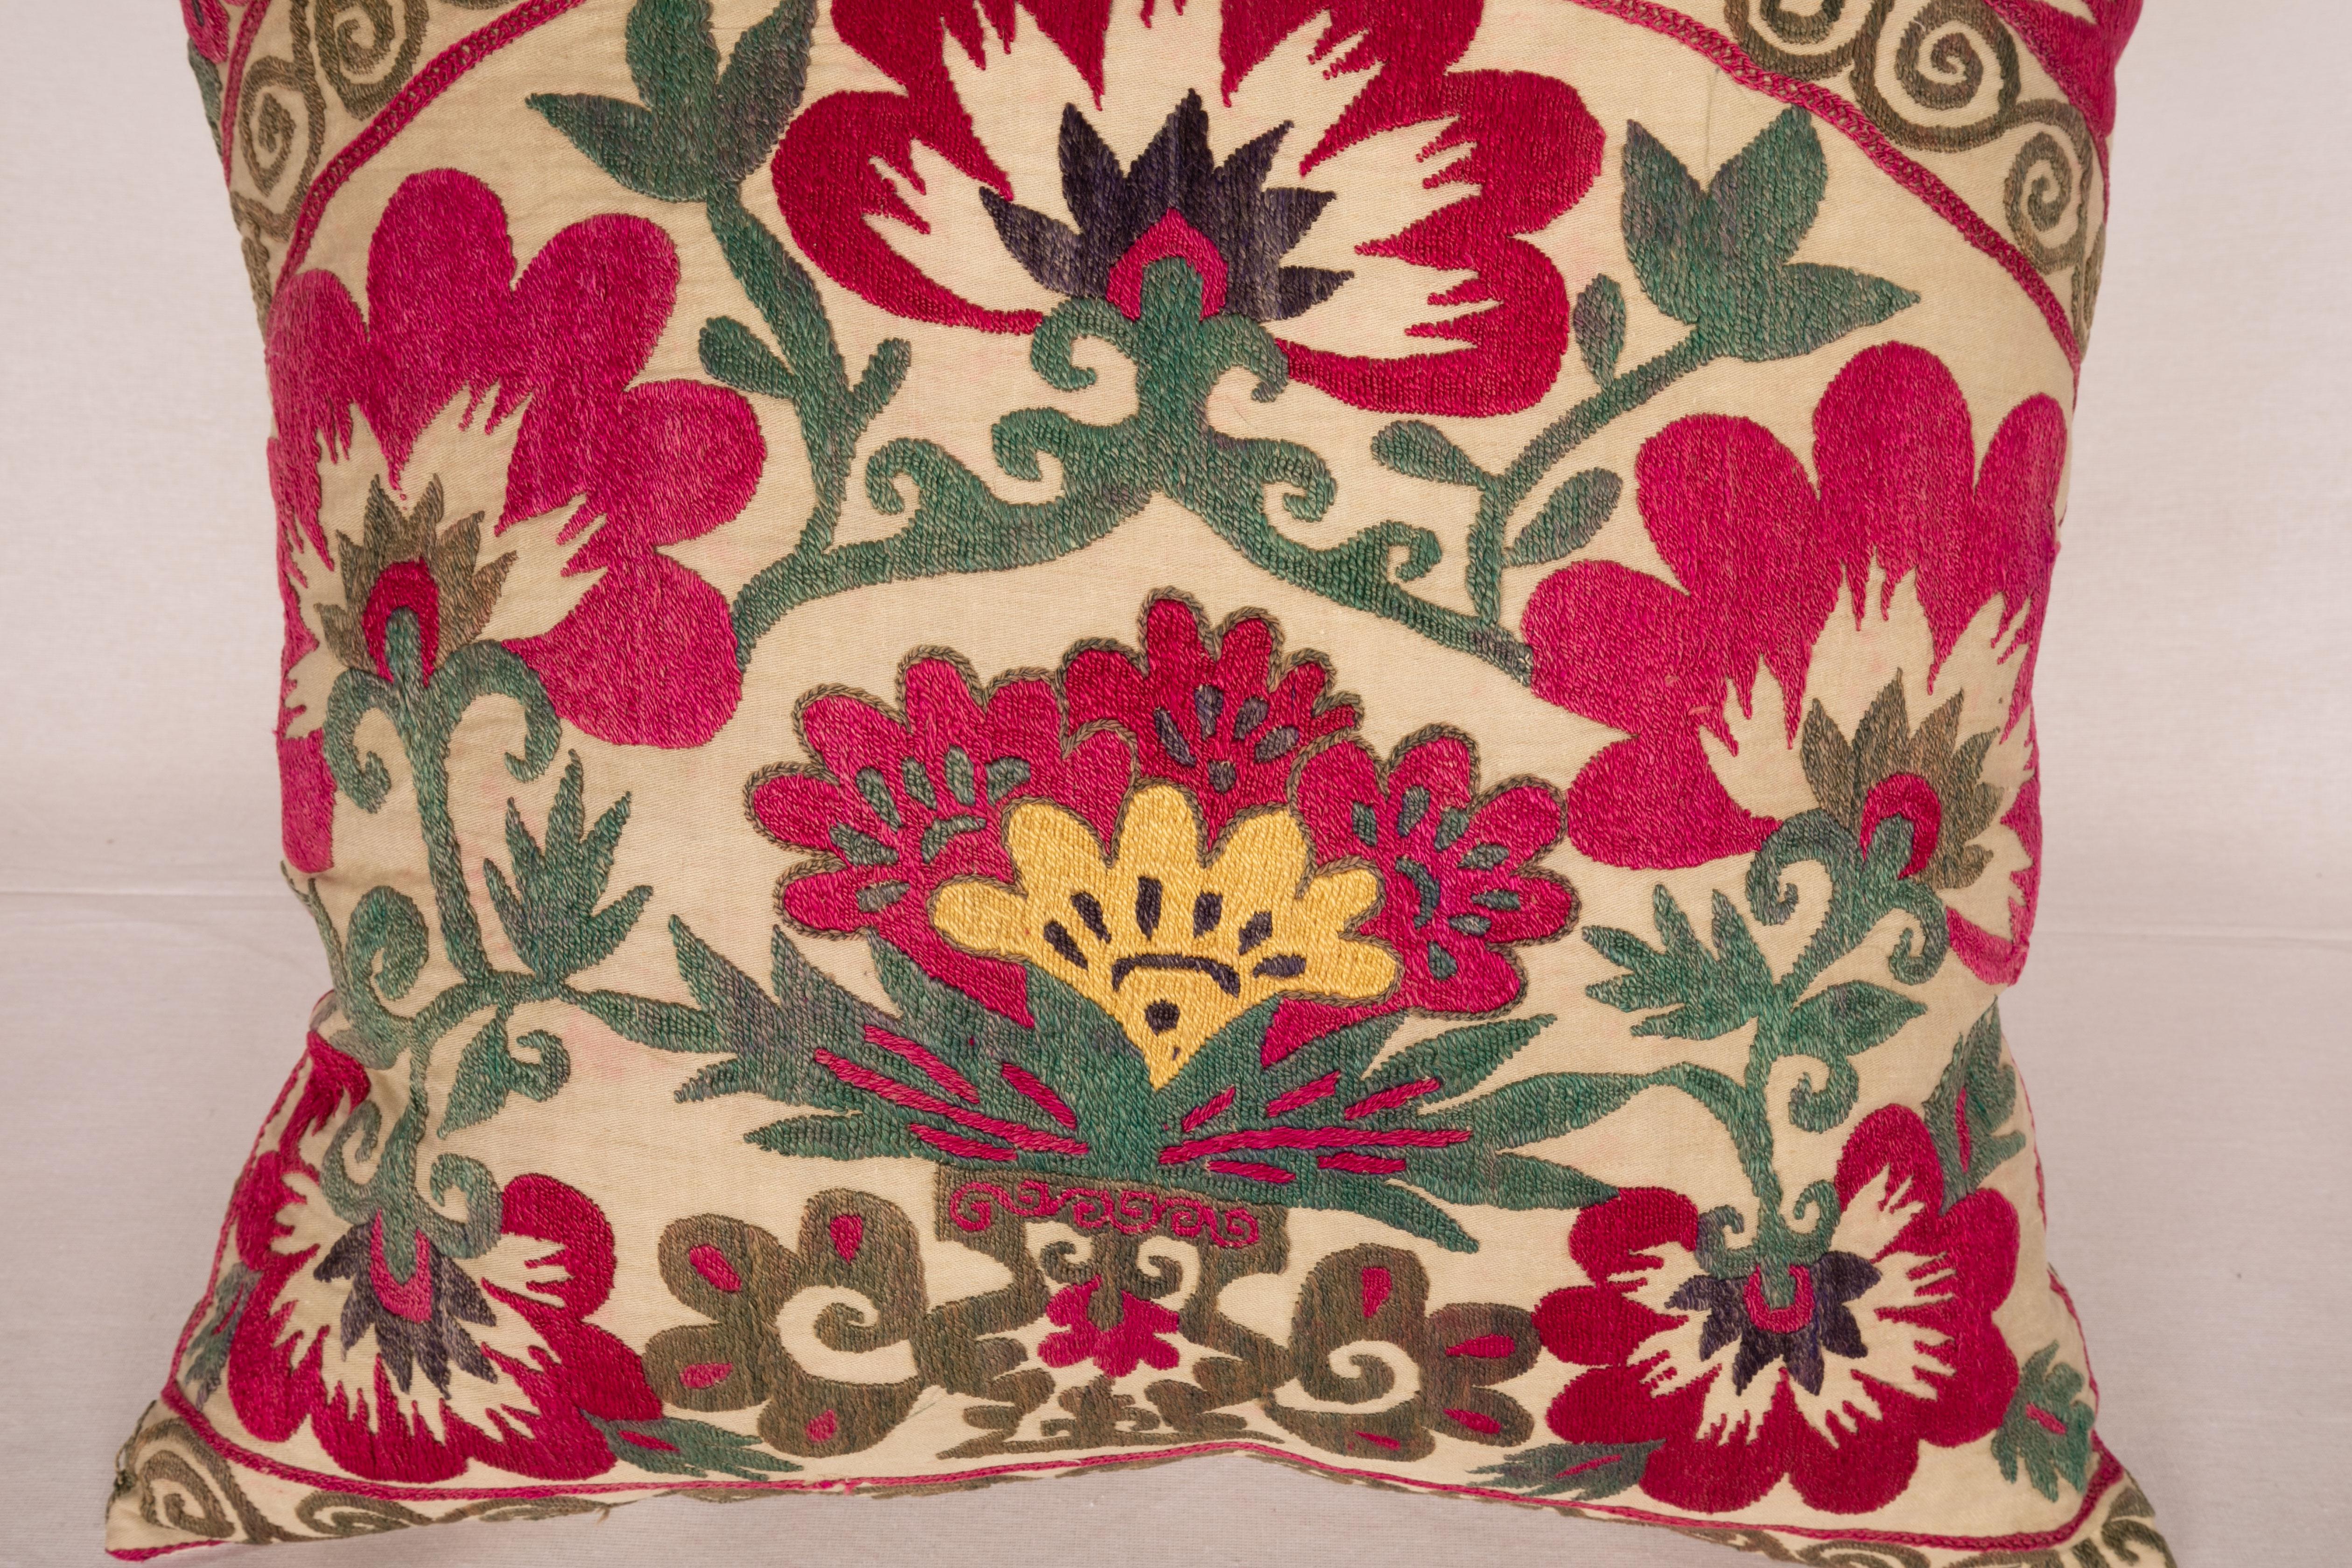 20th Century Suzani Pillow Cover Made from a Vintage Suzani, Uzbekistan, 1970s